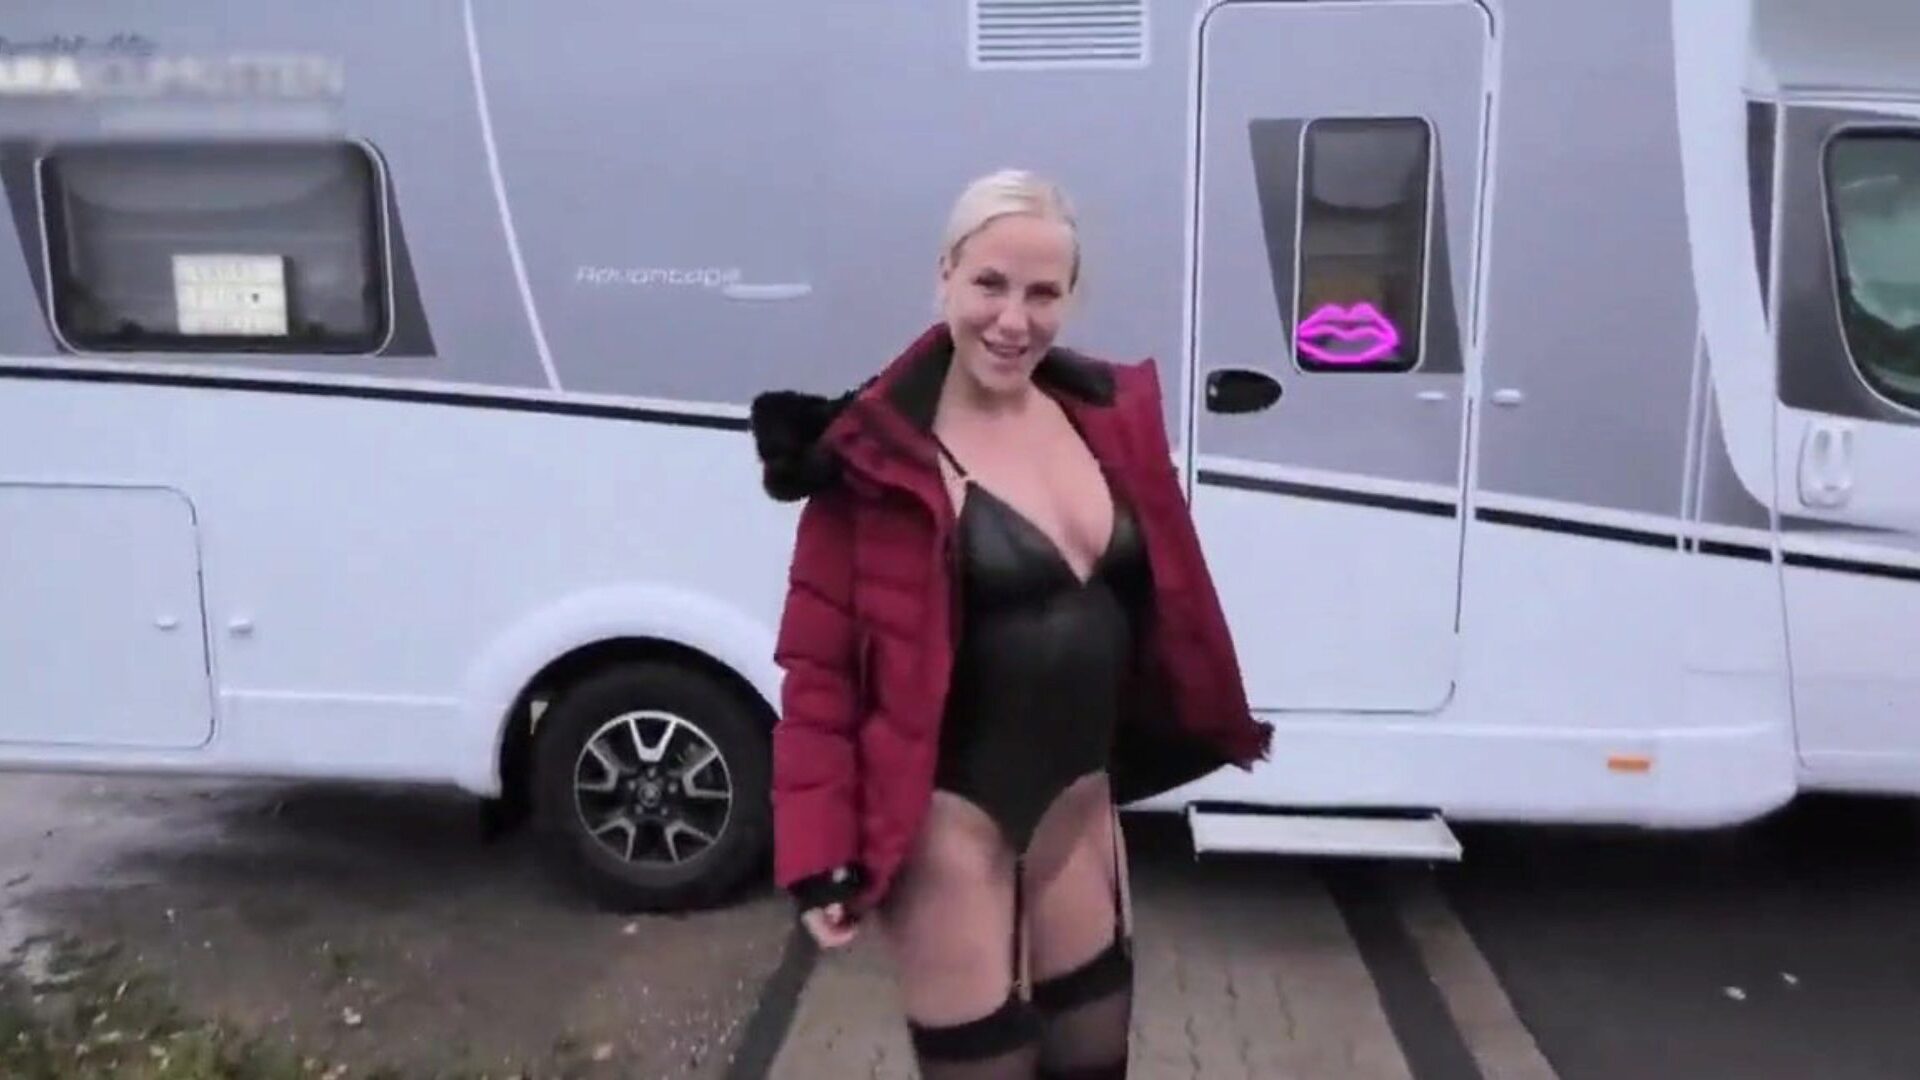 Besuch Mich in Meinem Fickmobil Im Industriegebiet: Porn 09 Watch Besuch Mich in Meinem Fickmobil Im Industriegebiet clip on xHamster - the ultimate selection of free-for-all German Xxx Im HD gonzo porno tube movies